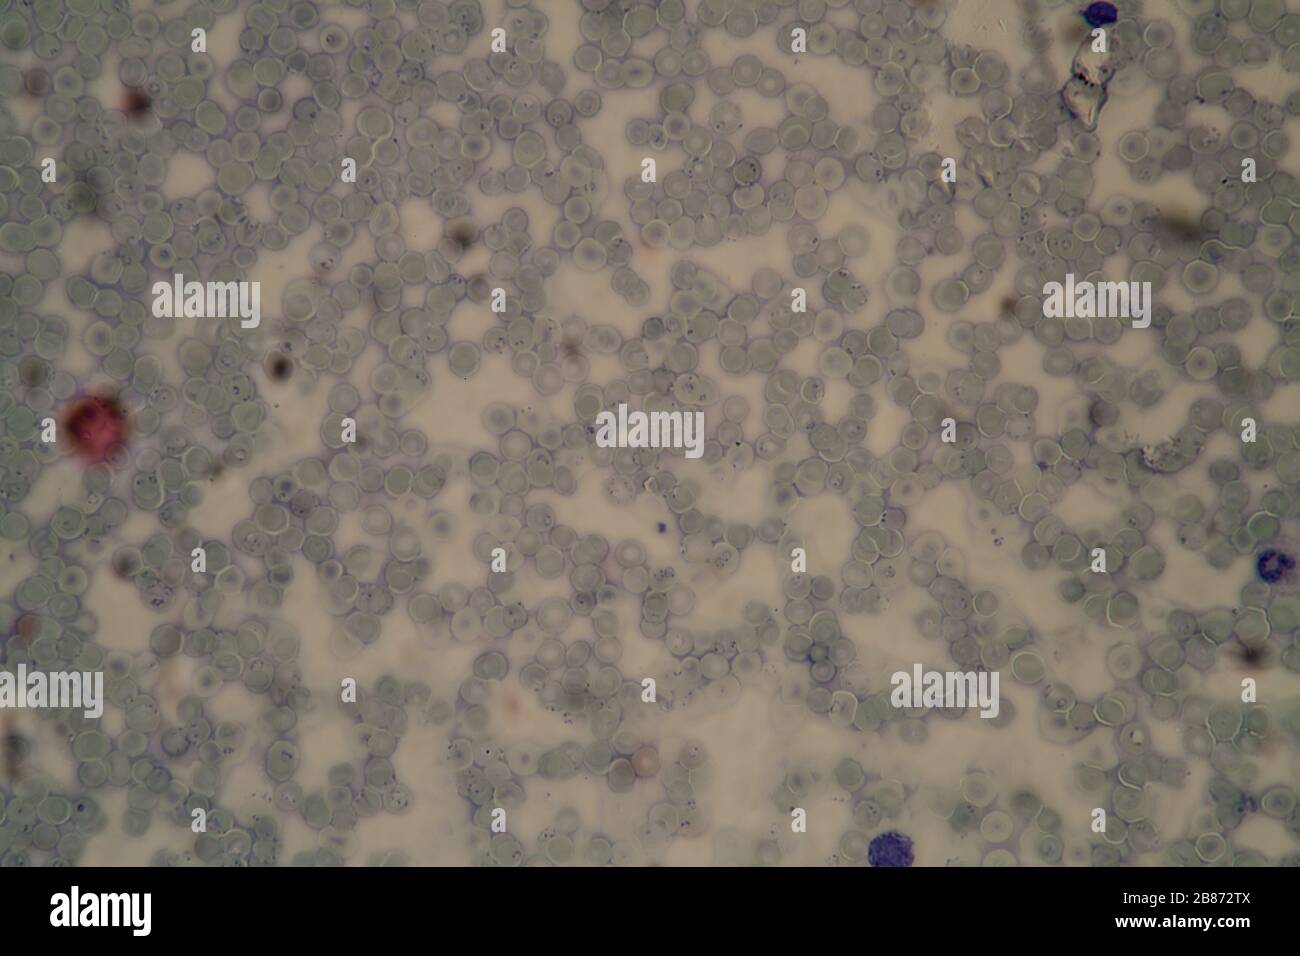 Malaria Parasites In Red Blood Cells Under The Microscope 400x Stock Photo Alamy